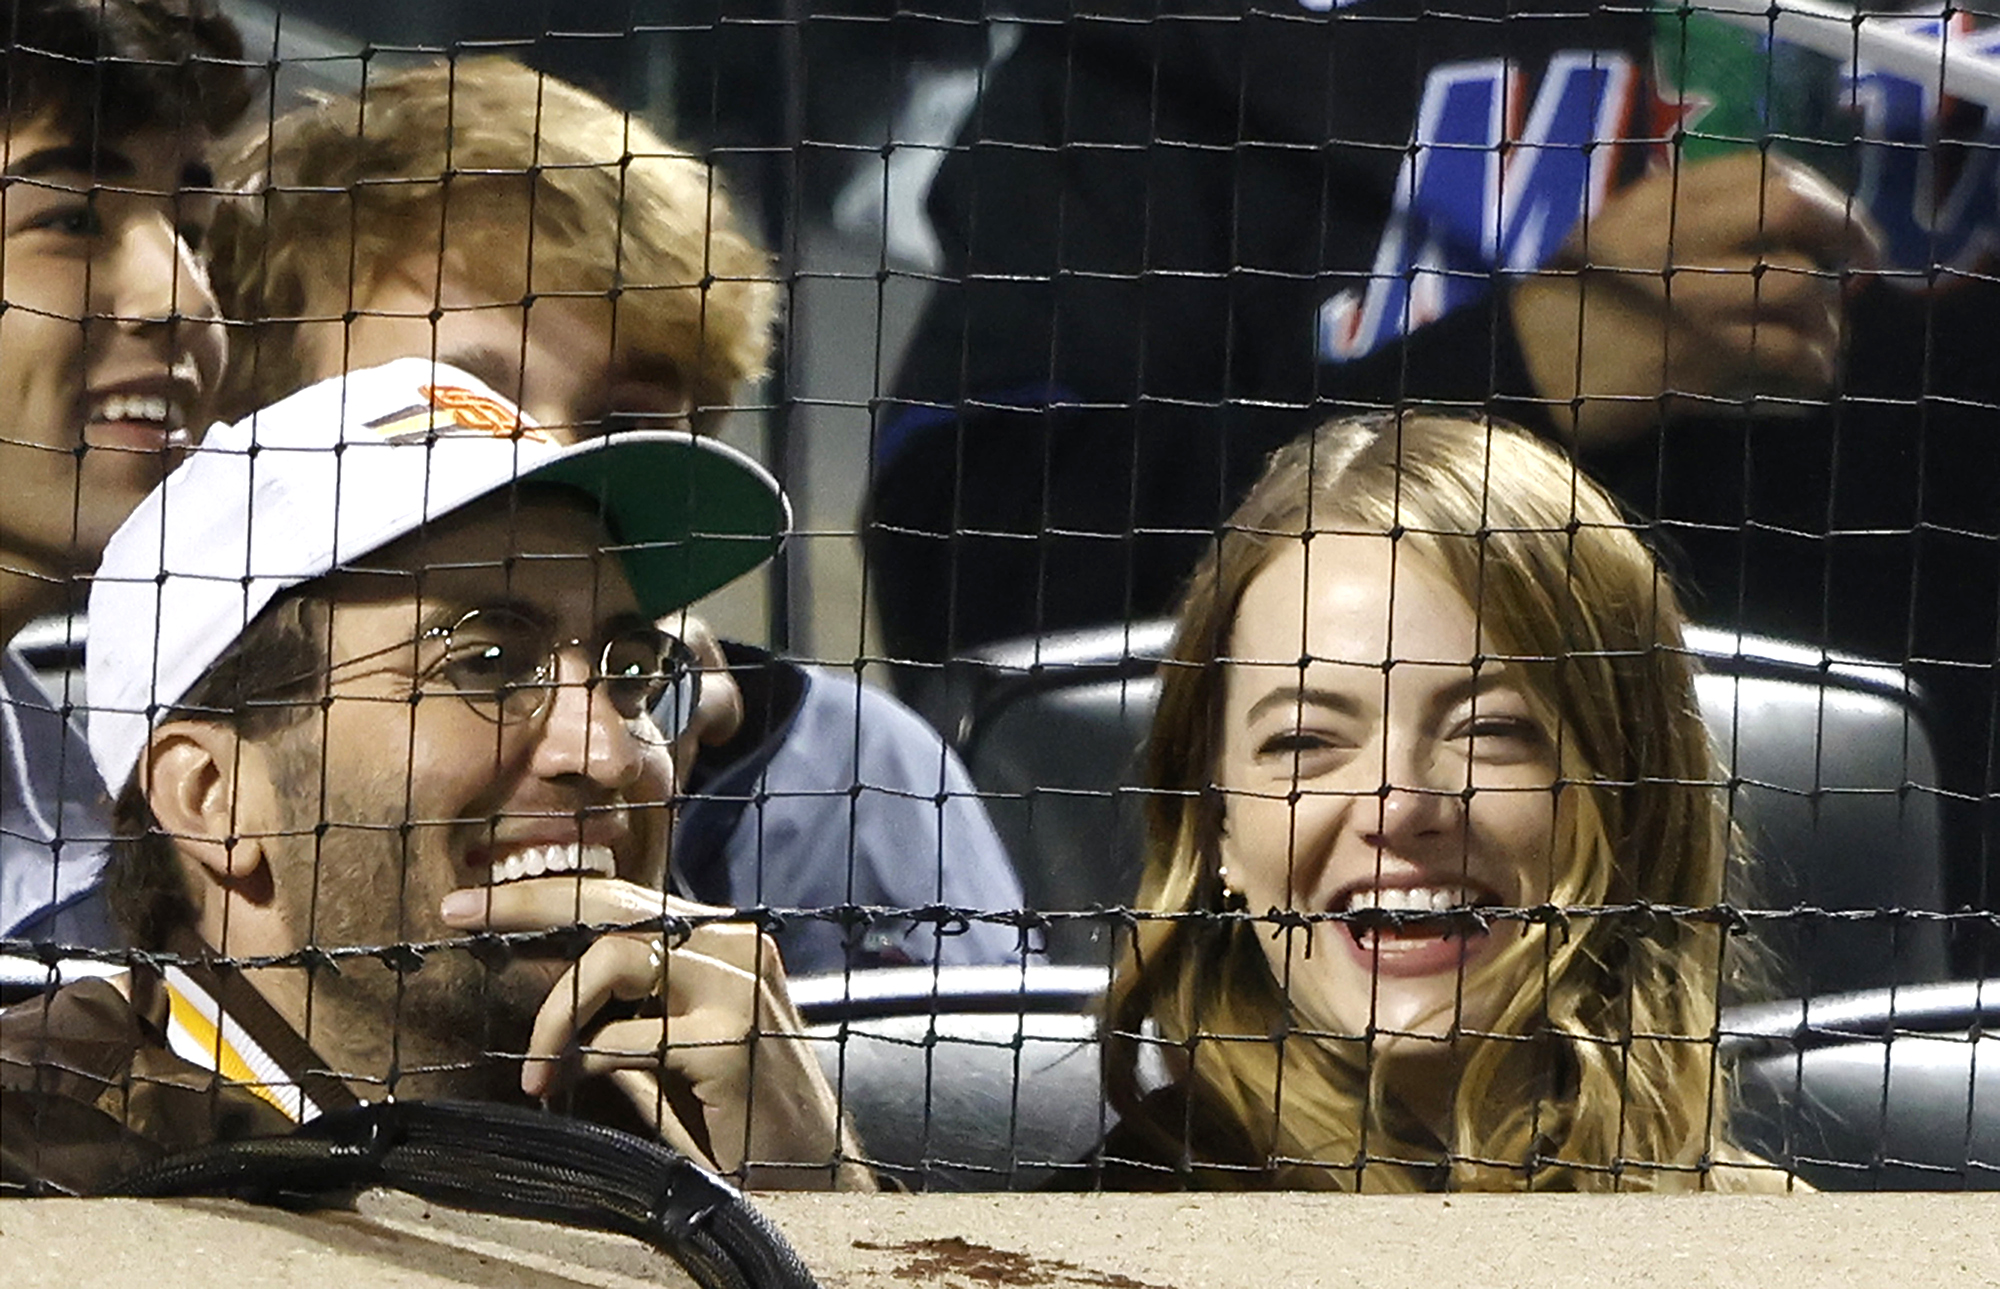 Emma Stone Reacts on Jumbotron After Being Booed at the New York